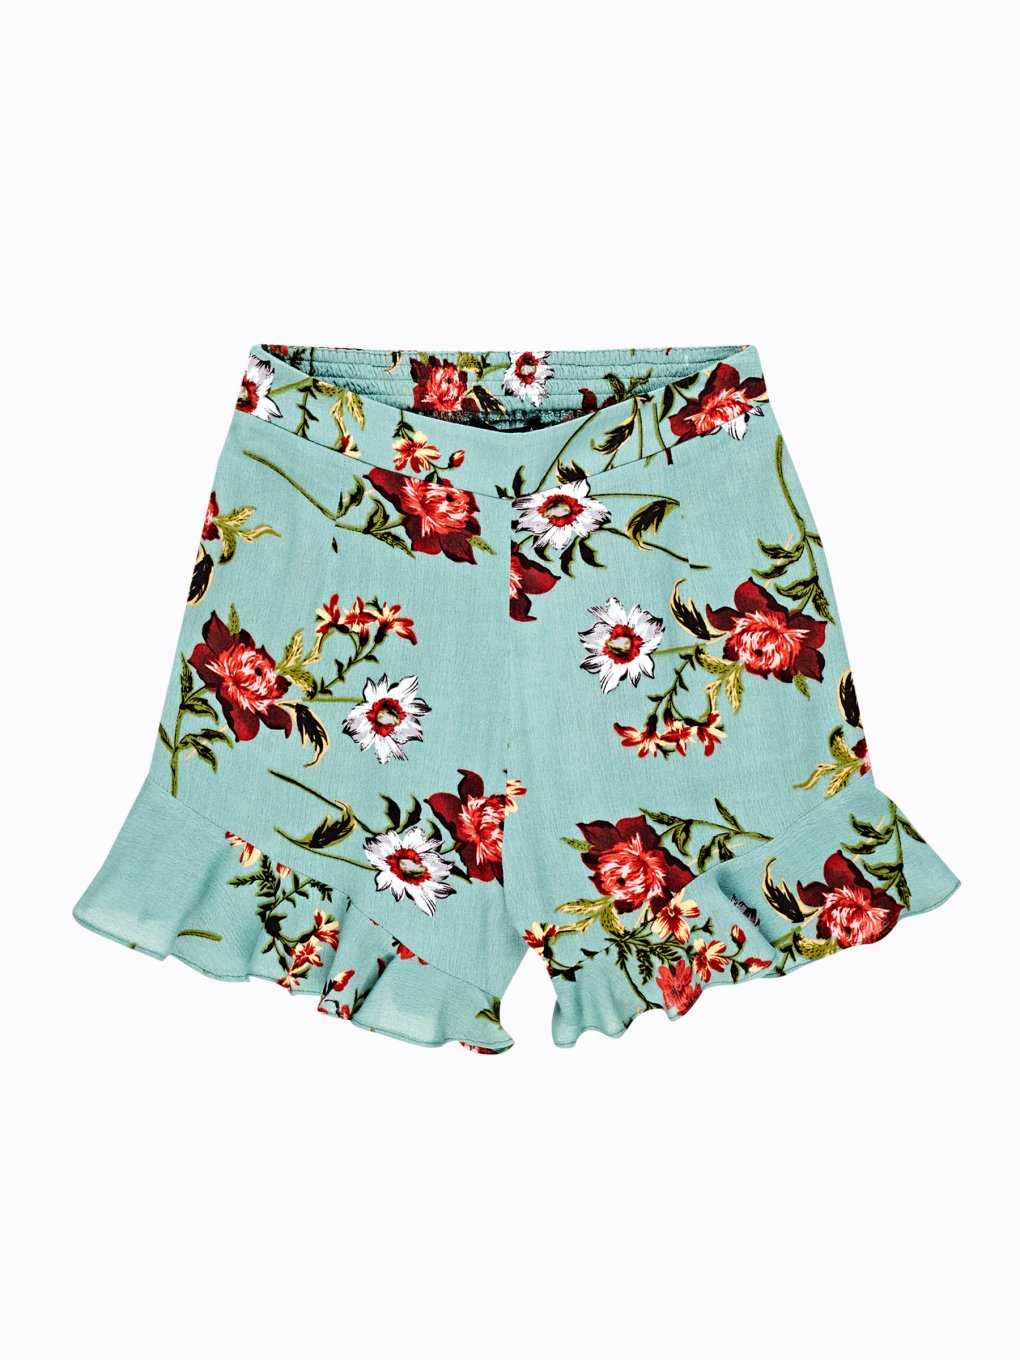 Floral print shorts with ruffle